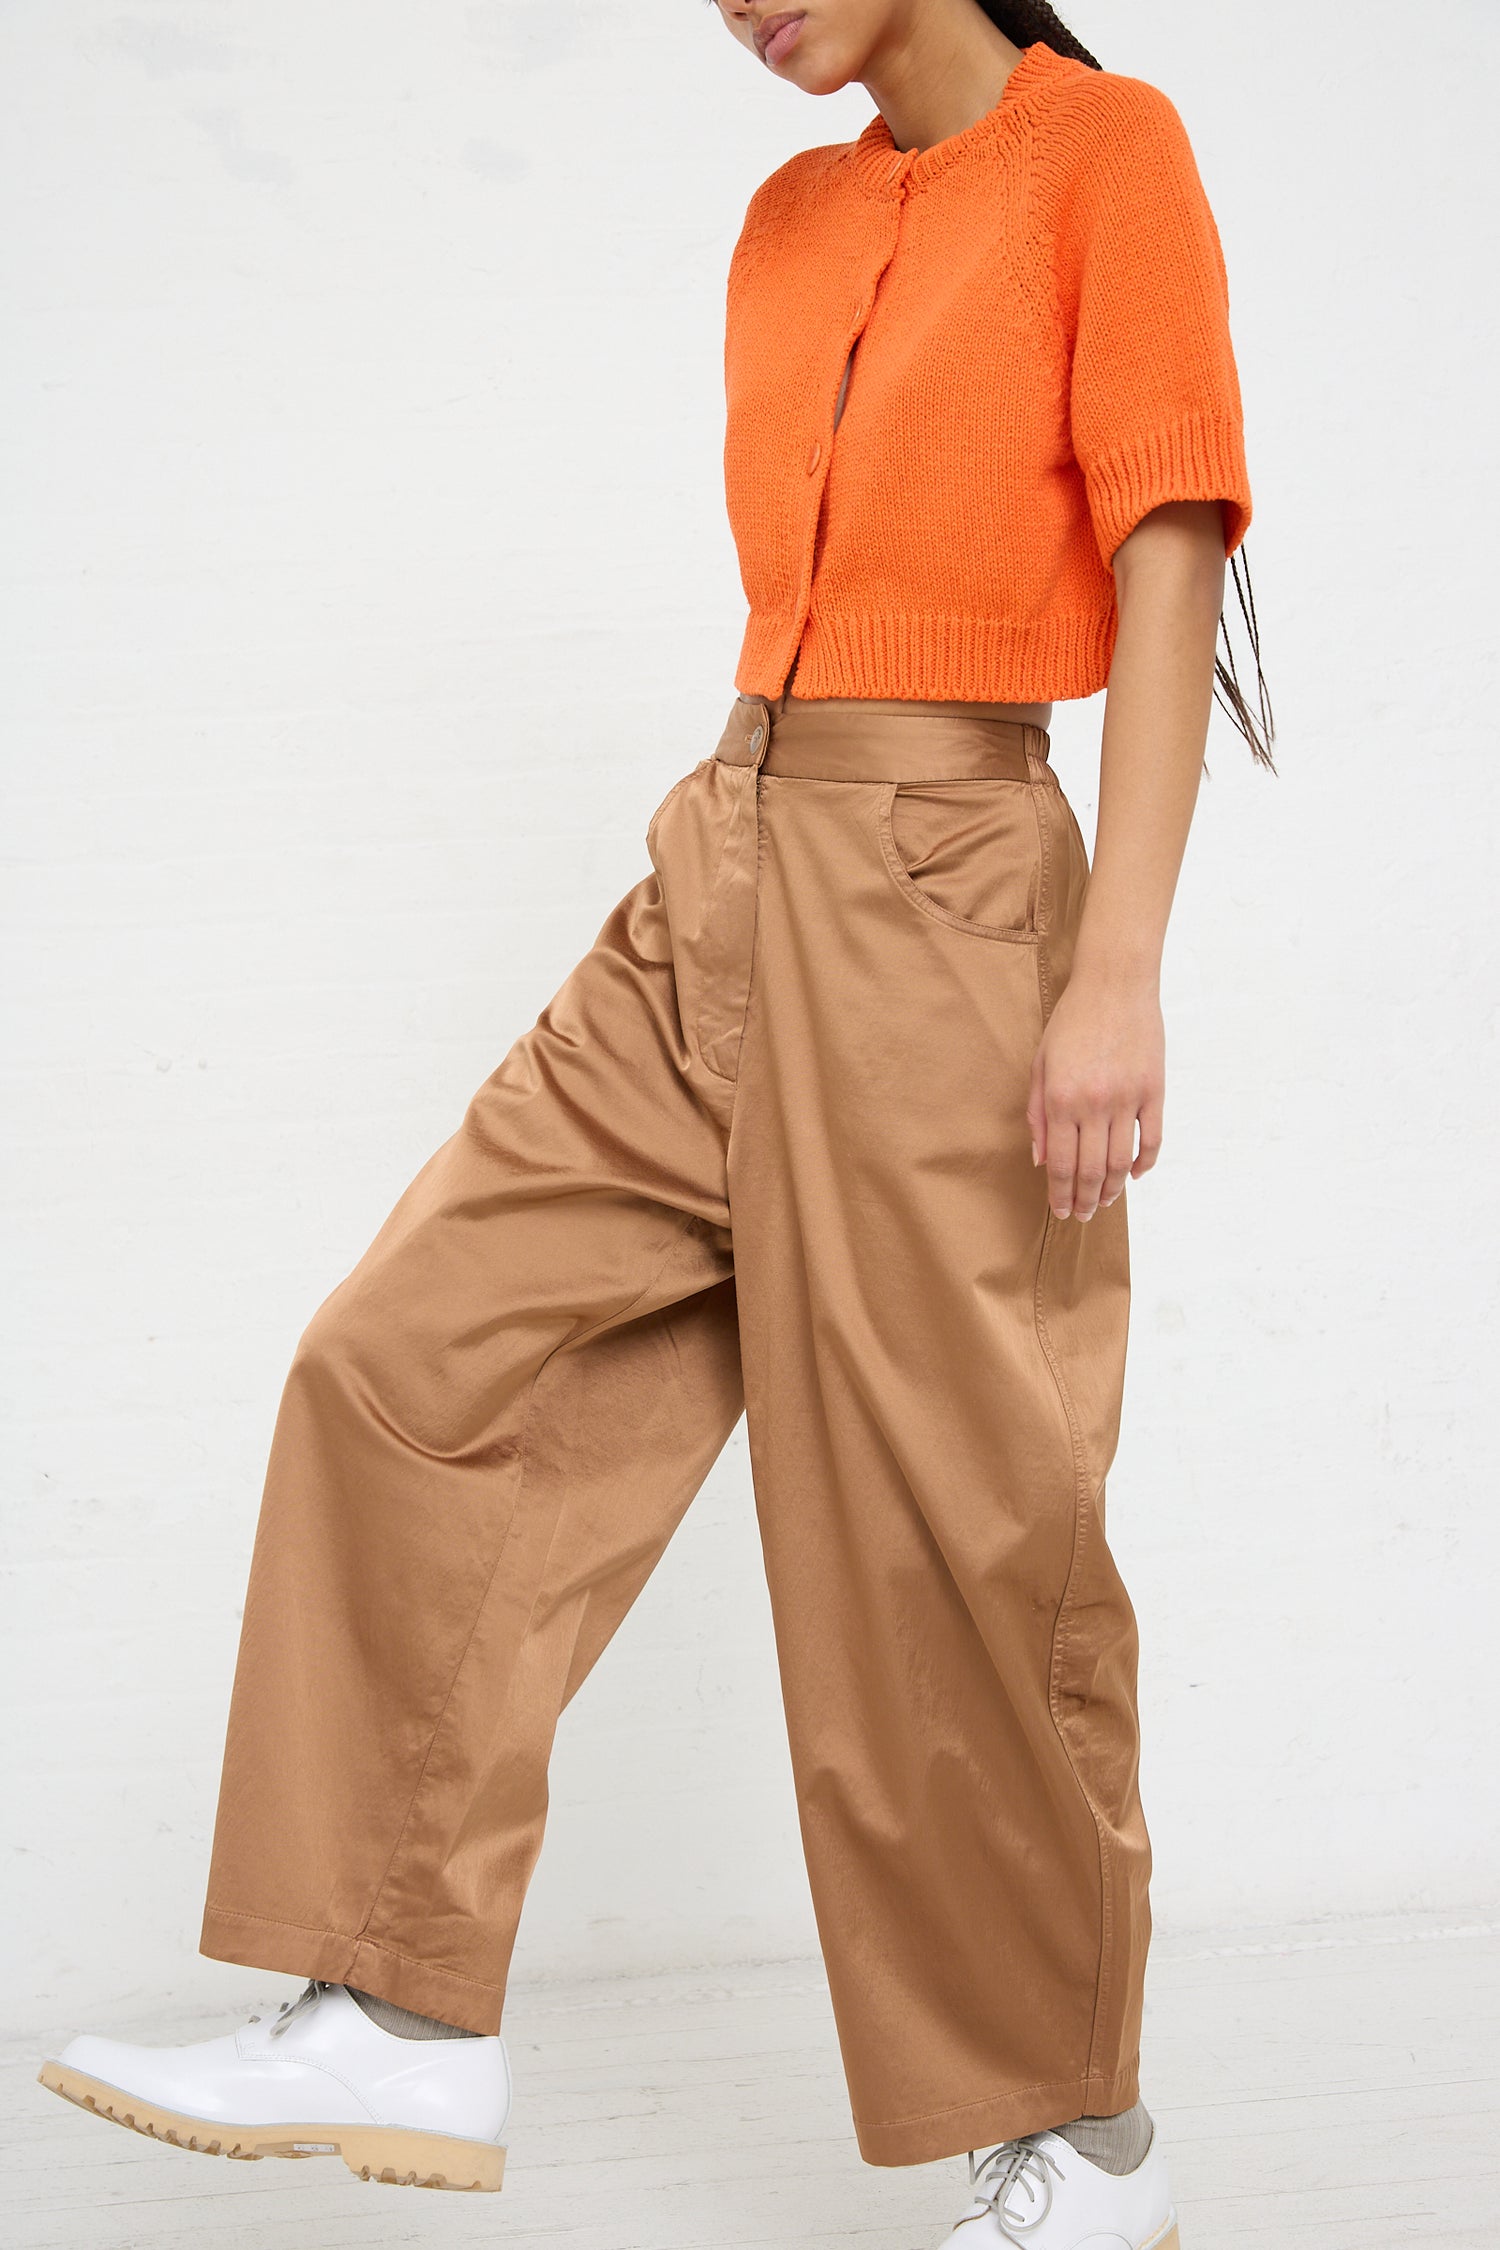 Woman in bright orange top and Cordera high-rise, wide-leg brown Satin Curved Pant in Camel standing against a white background.